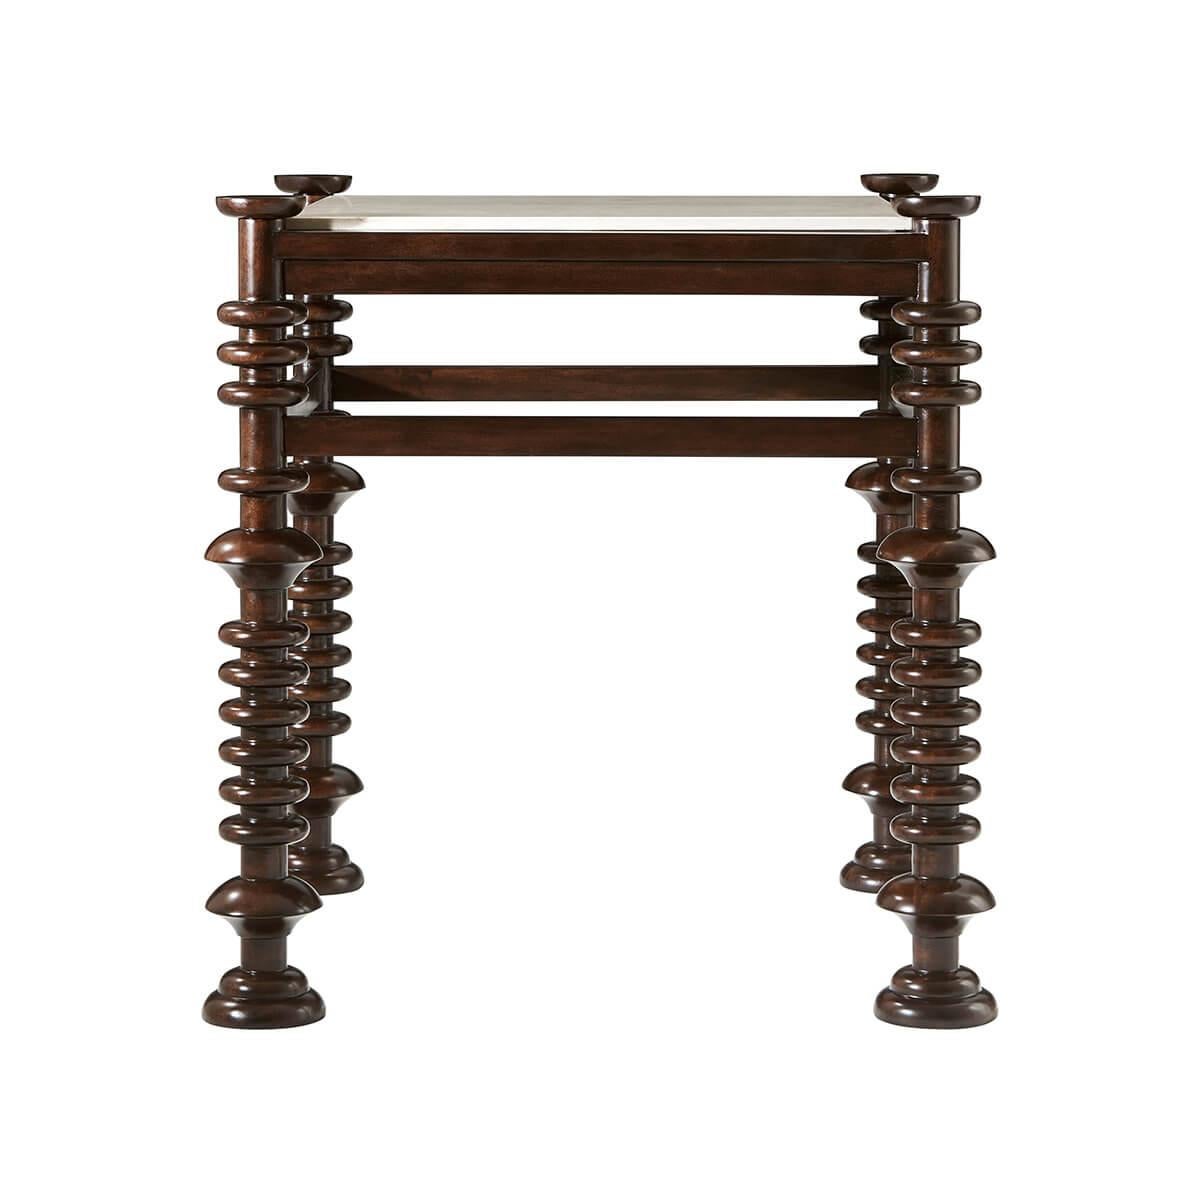 Modern Turned Leg Accent Table, a twist on a classic European Baroque design, turned and carved mahogany in our Cambrigde finish, with an inset marble top. 

The Crema Marfil stone top offsets and compliments the dark finish of the base. 